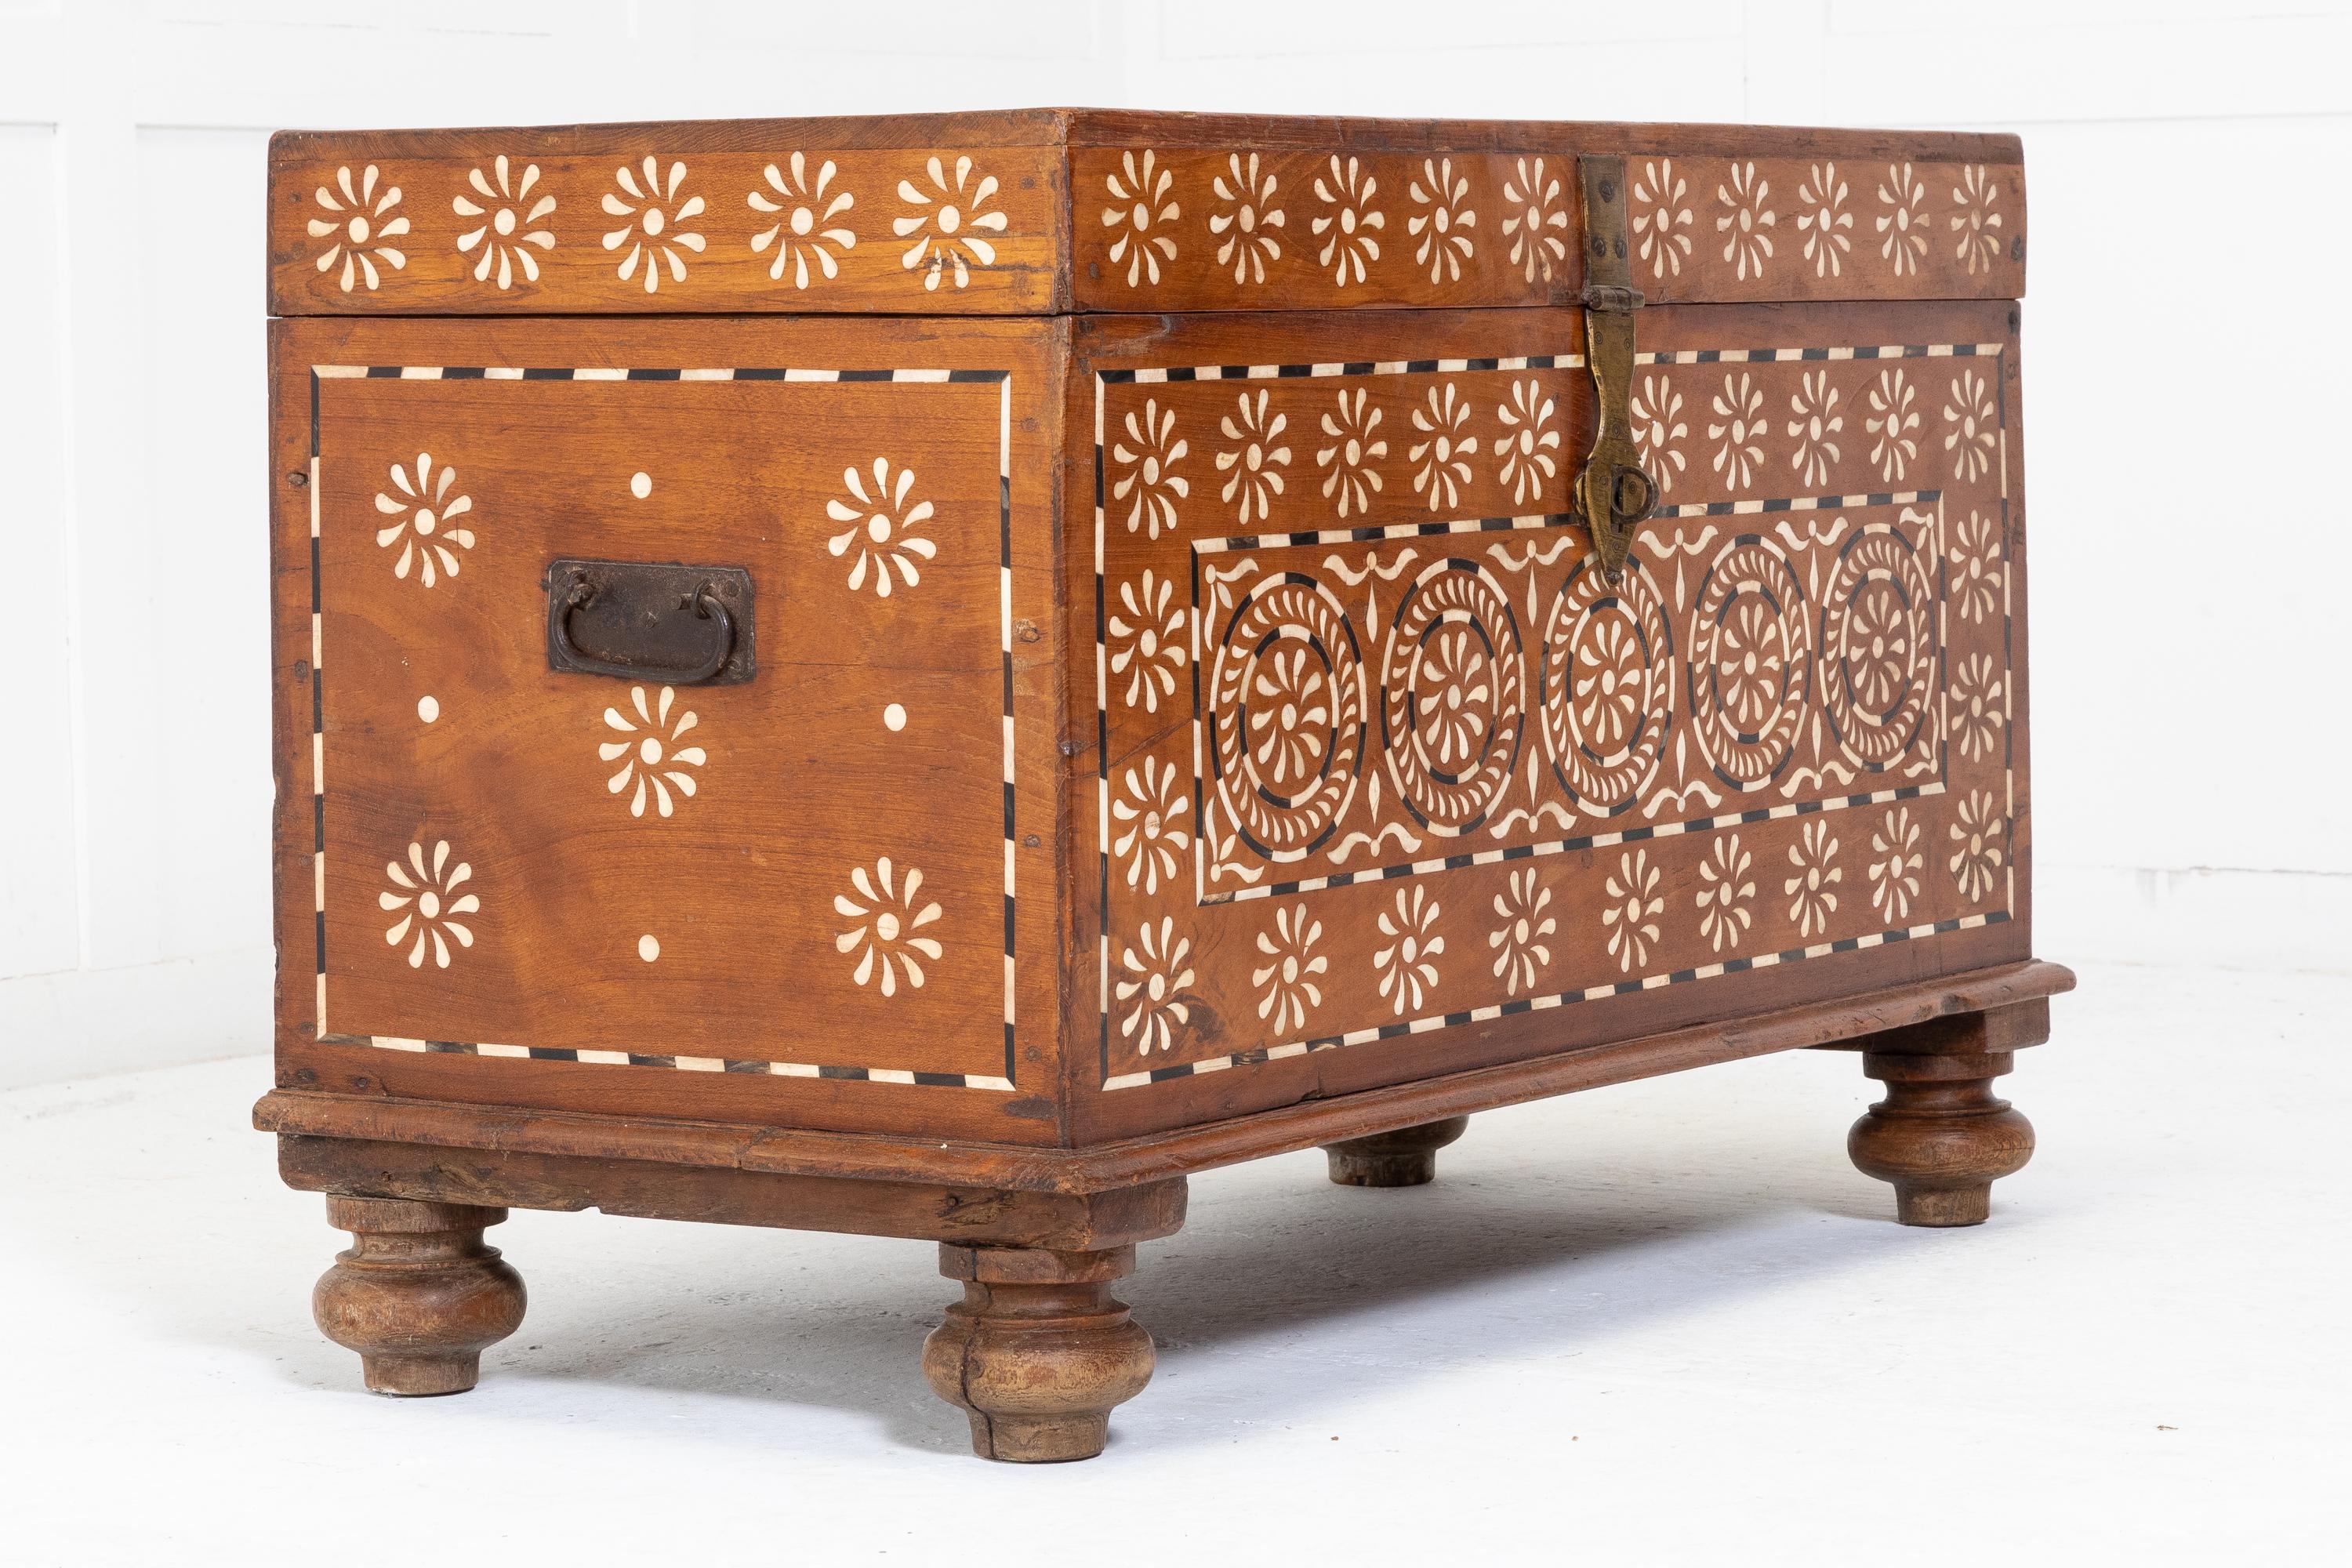 A wonderfully decorated, Anglo Indian bone inlaid teak trunk. A good size with intricately decorated inlaid circles. Having brass carrying side handles and brass front lock. Standing on plinths and turned bun feet. Circa 1920.

A very decorative